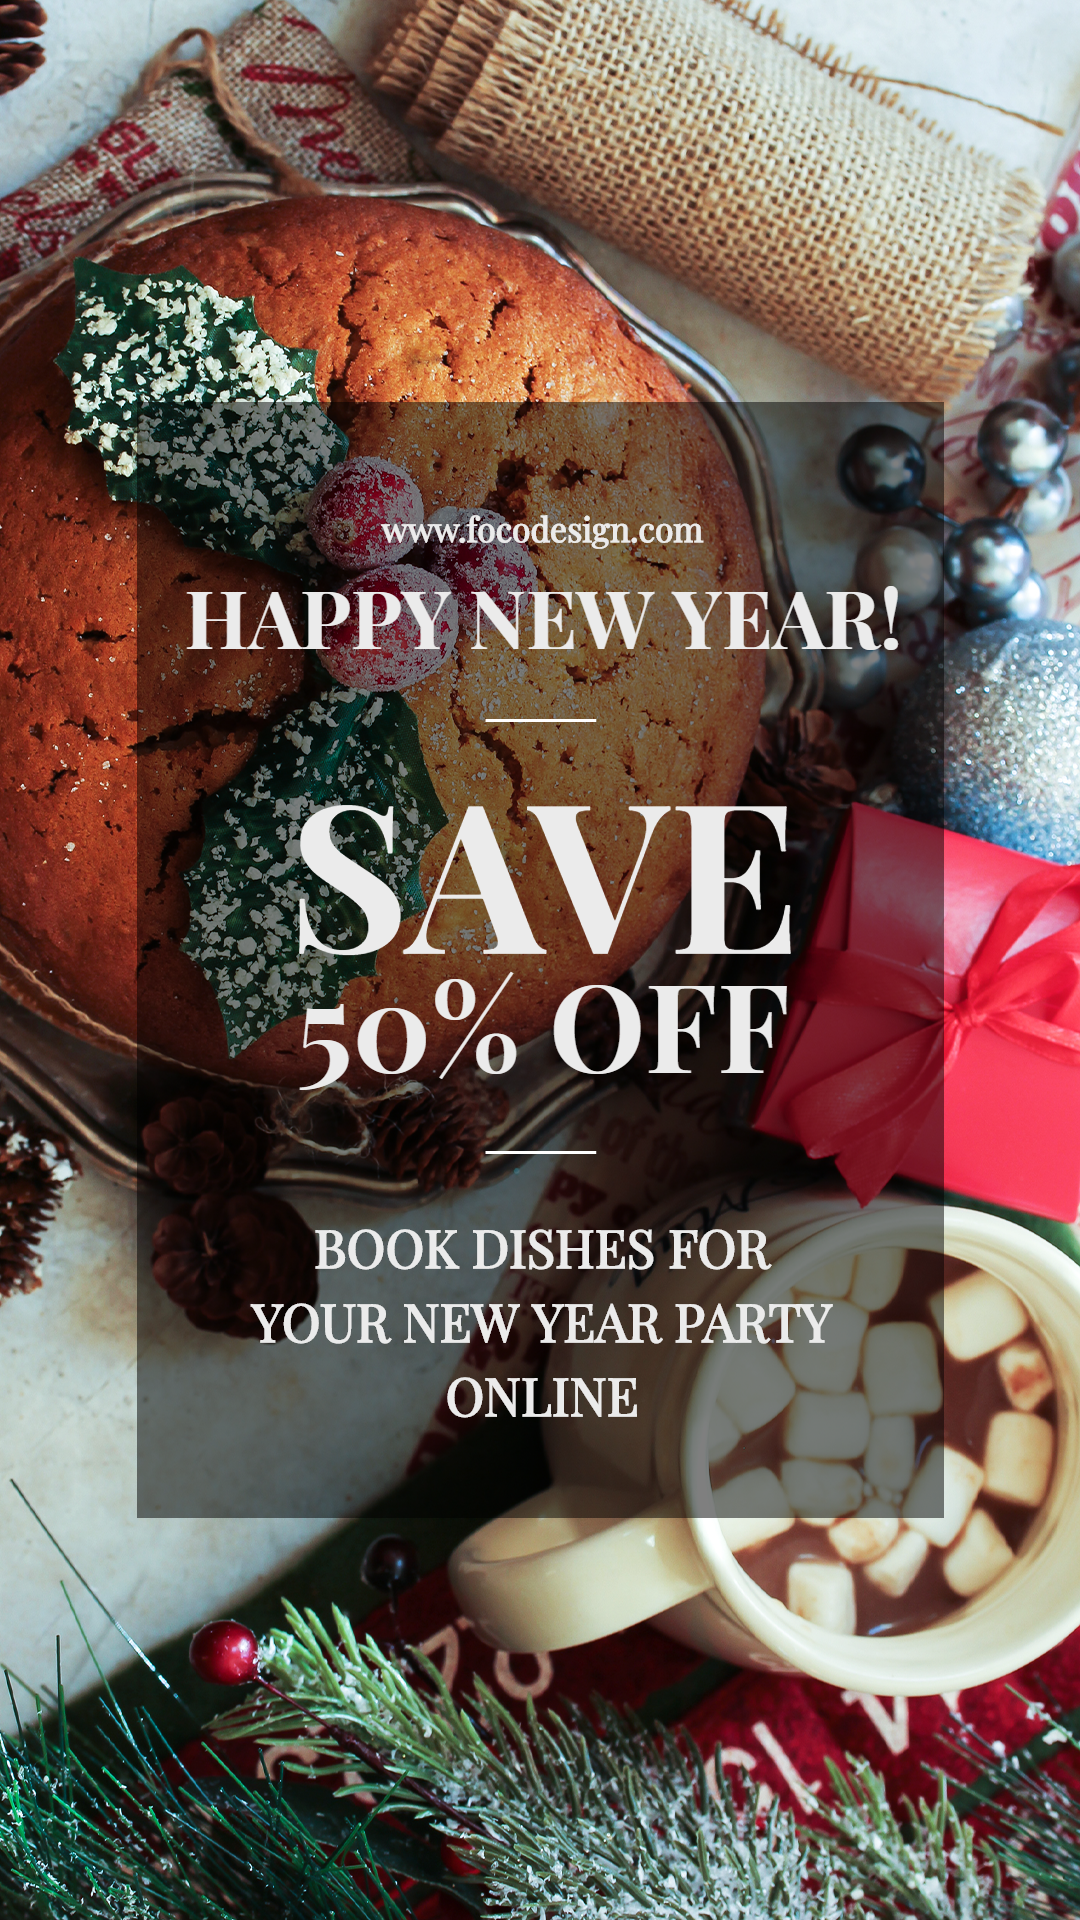 Creative New Year Party Dishes Booking Online Promo Ecommerce Story预览效果